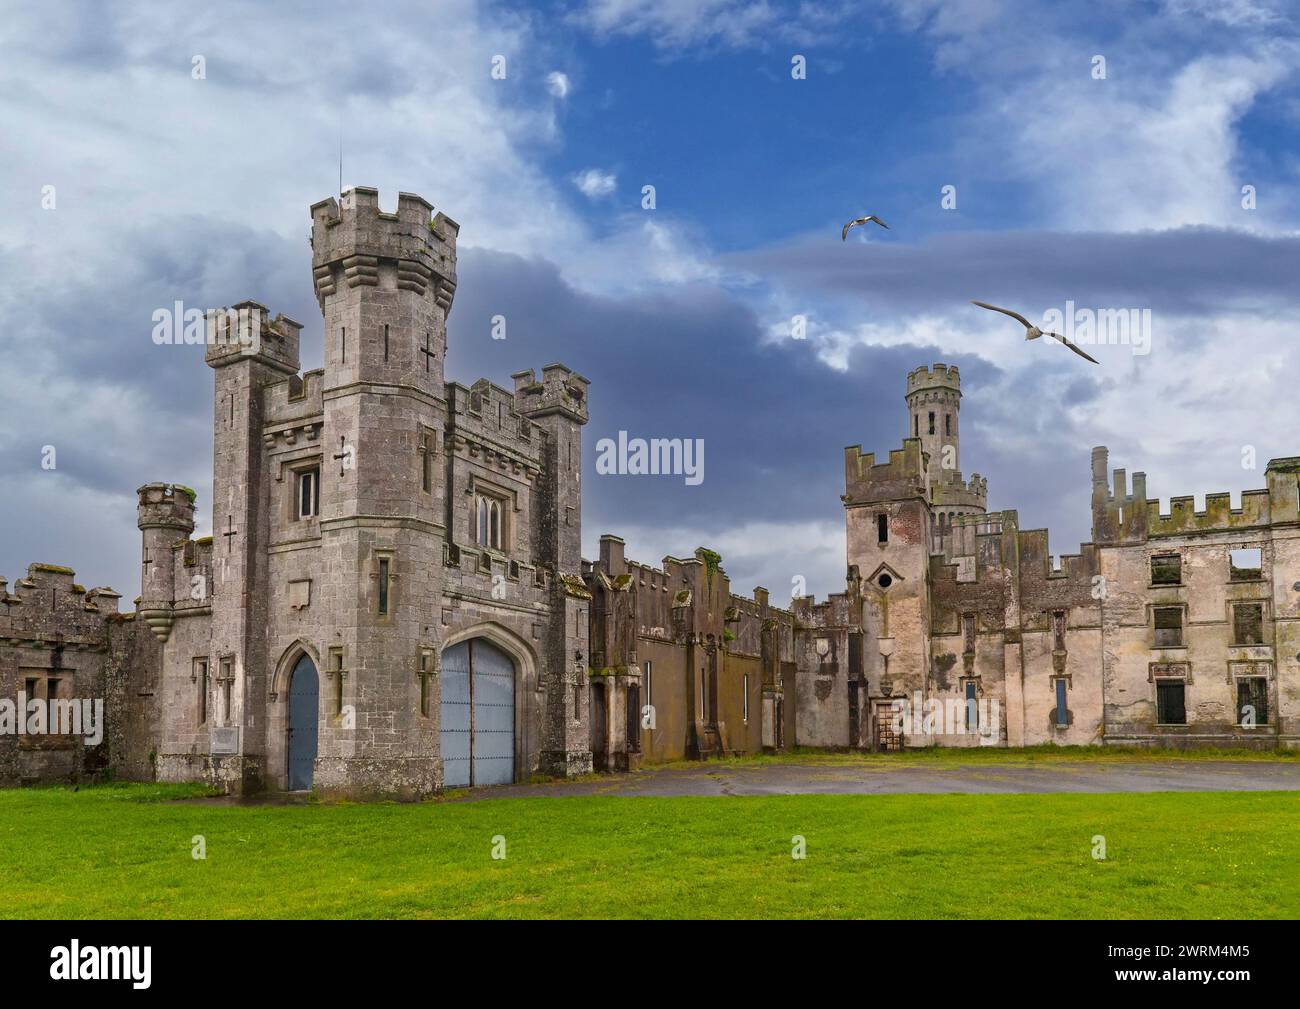 A gaunt Irish monument to mood, Duckett's Grove in County Carlow, Ireland, a Gothic Revival castle from 1820 razed by fire in 1933. Stock Photo